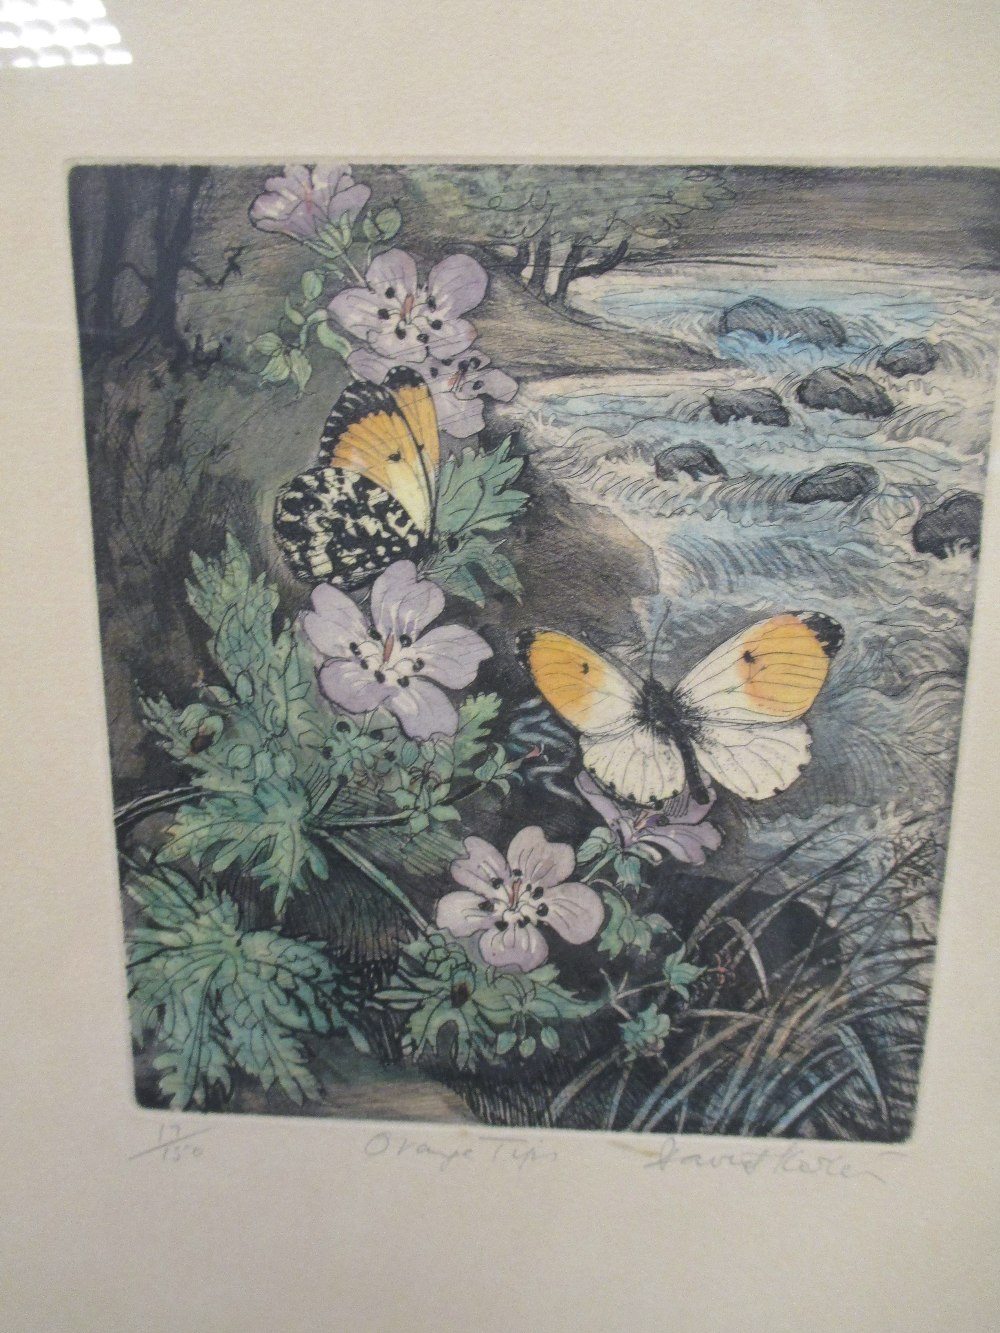 A collection of etchings and lithographs by Bob Chaplin Chris Plowman, Barbara Newcomb, Carry - Image 2 of 11